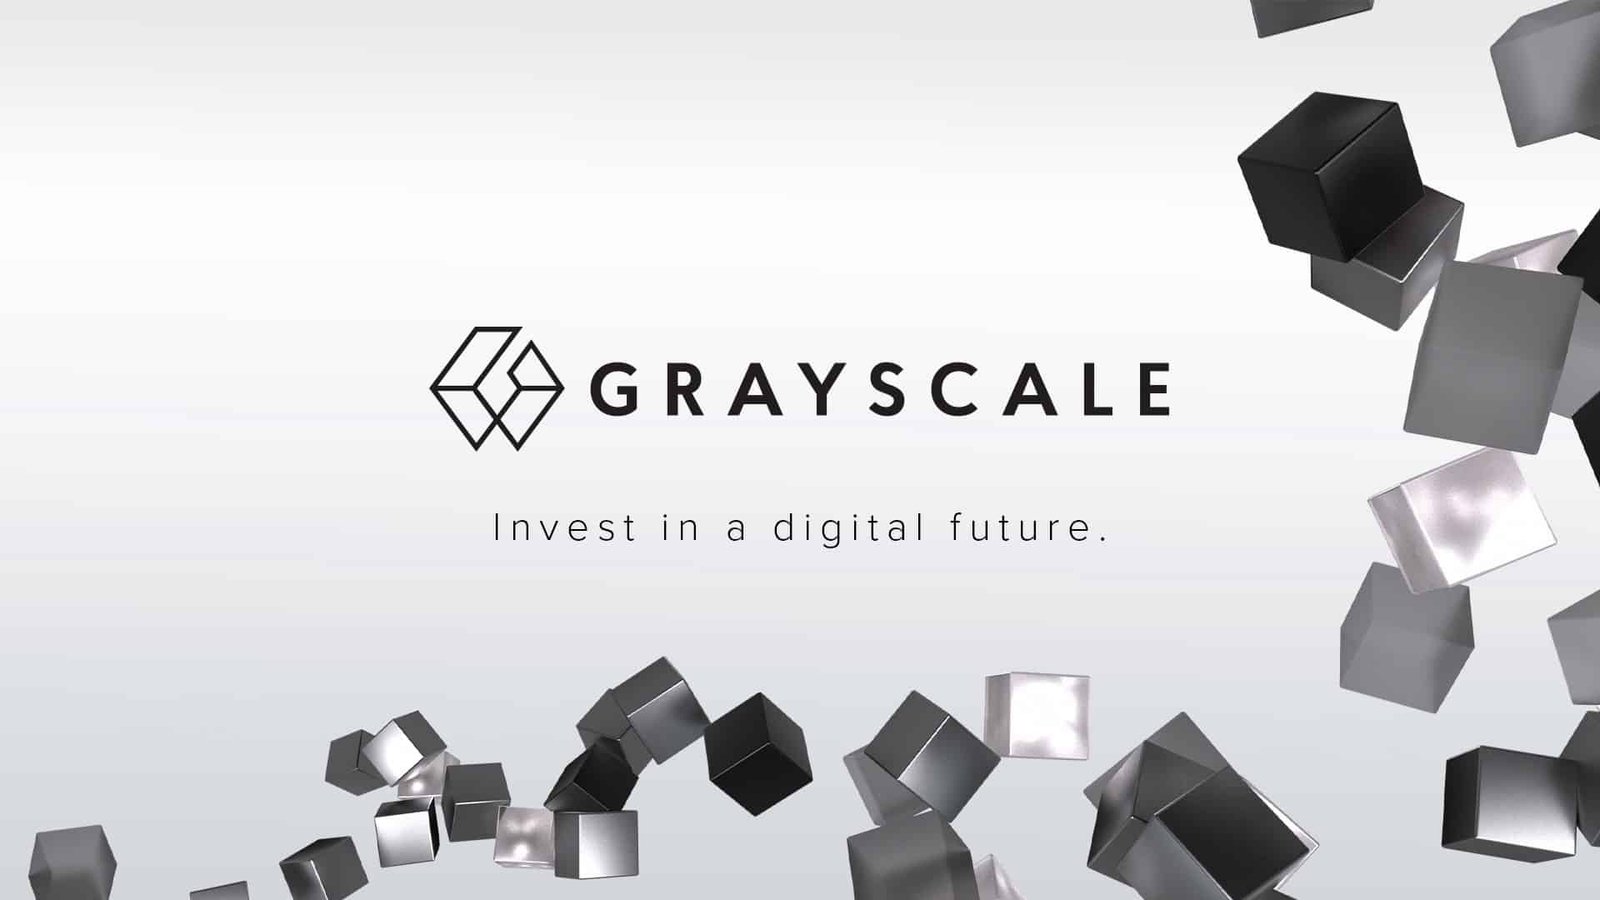 Grayscale Investments - Wikipedia